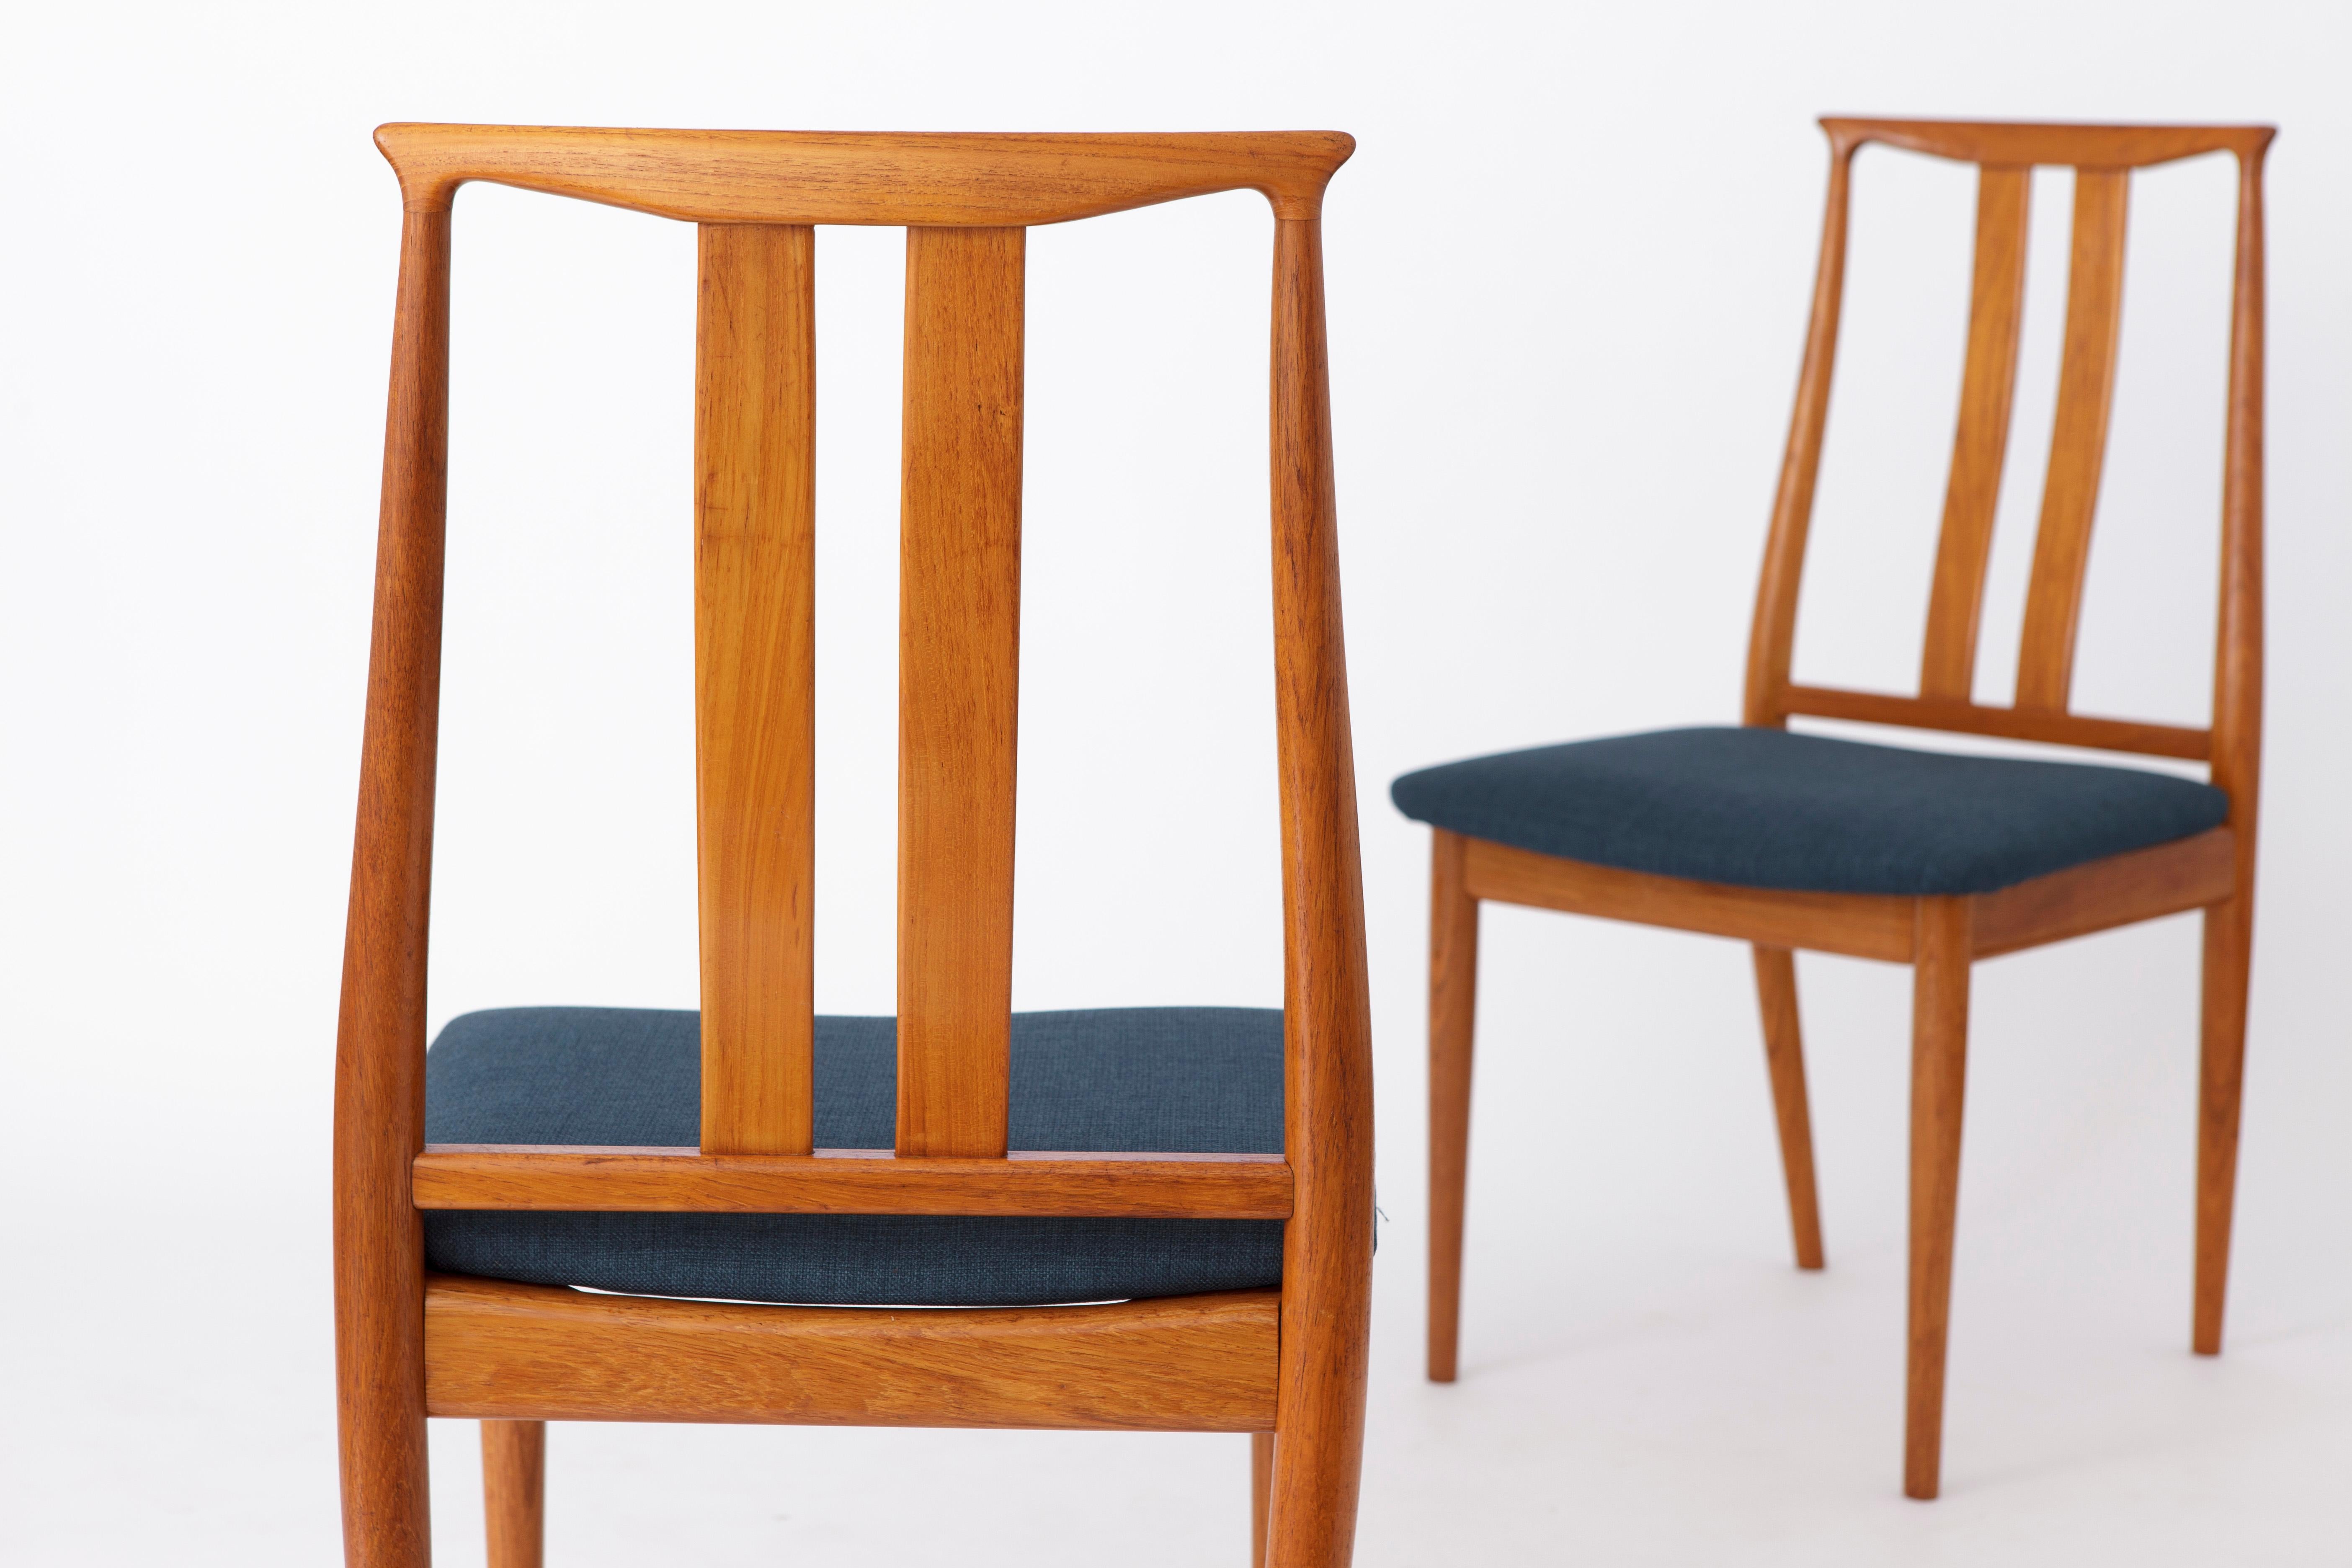 4 Vintage Dining Chairs, 1960s, Danish, Teak In Good Condition For Sale In Hannover, DE